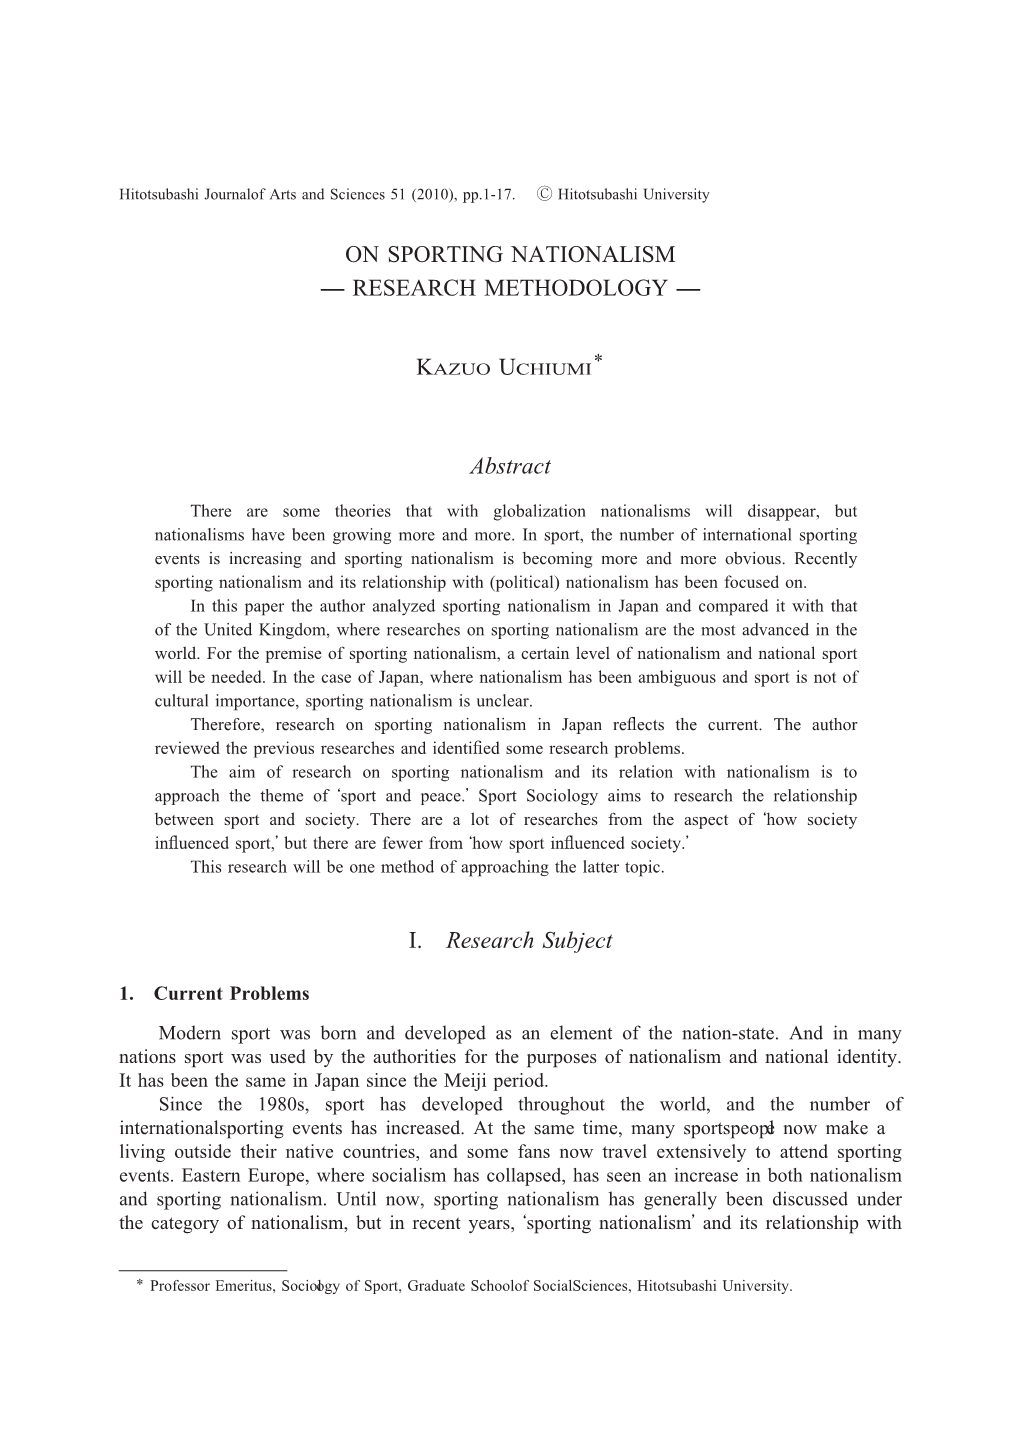 ON SPORTING NATIONALISM ̶ RESEARCH METHODOLOGY ̶ Abstract I. Research Subject